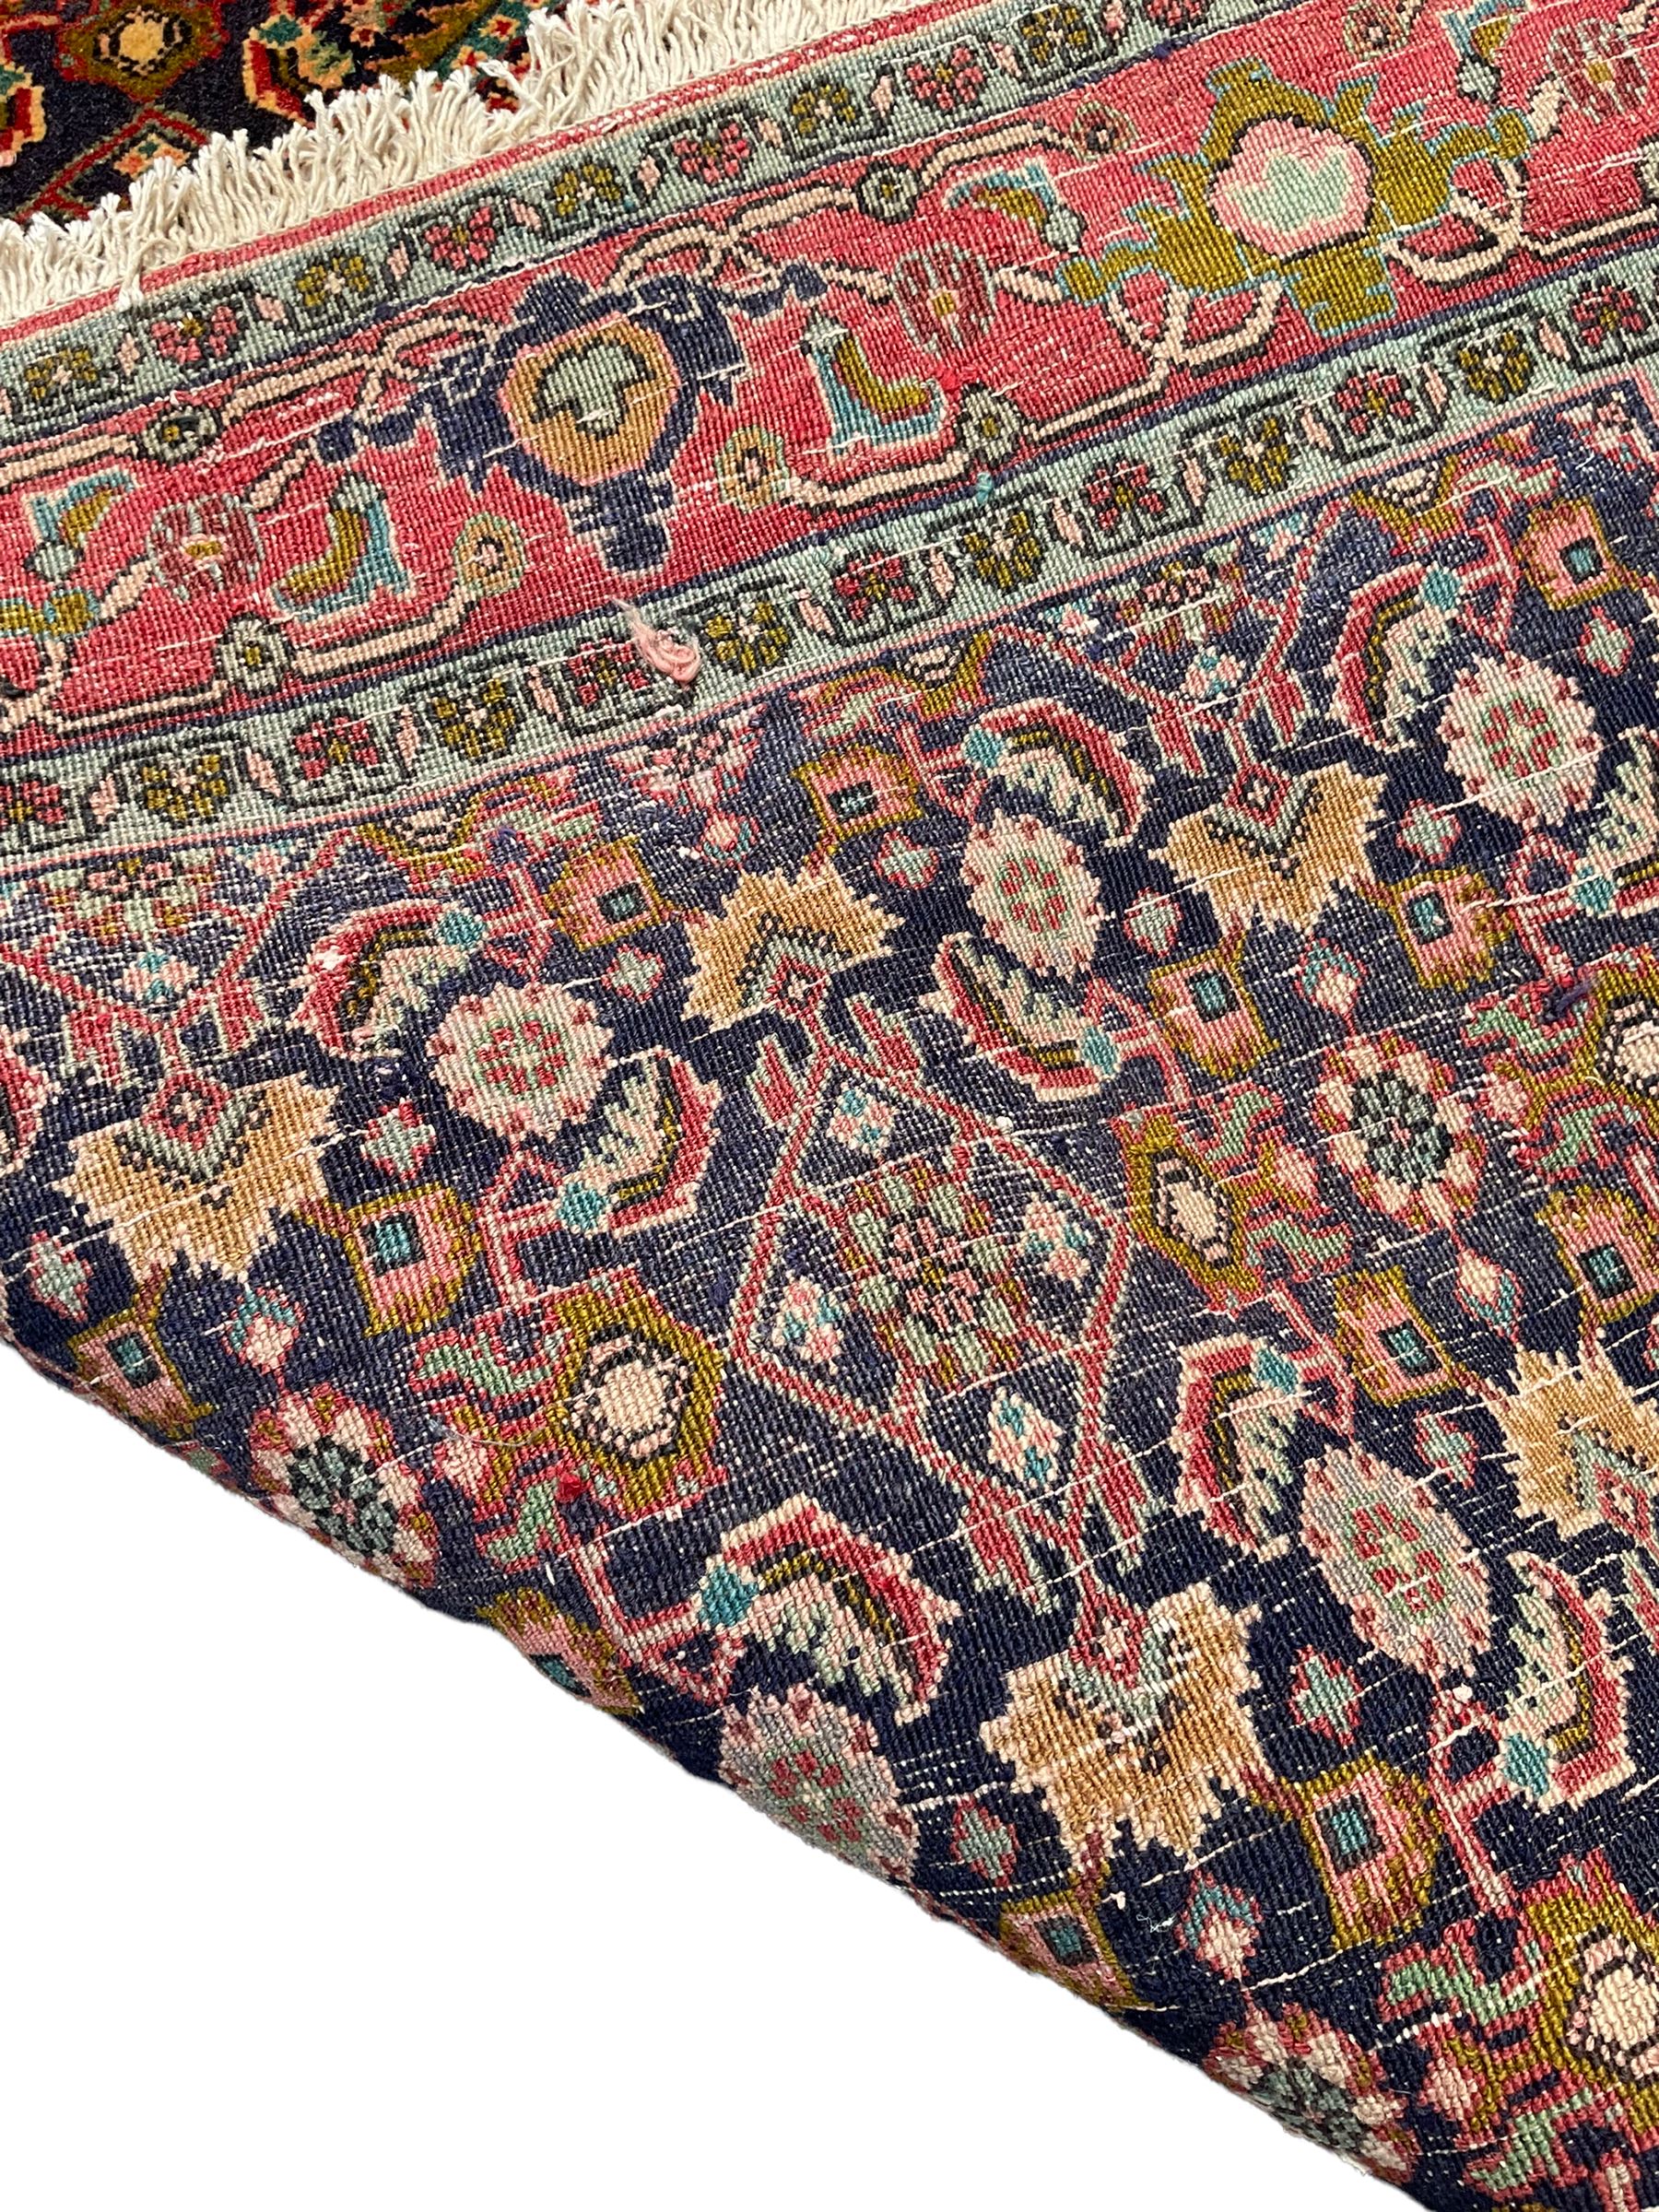 Persian Bijar red and blue ground rug - Image 5 of 6